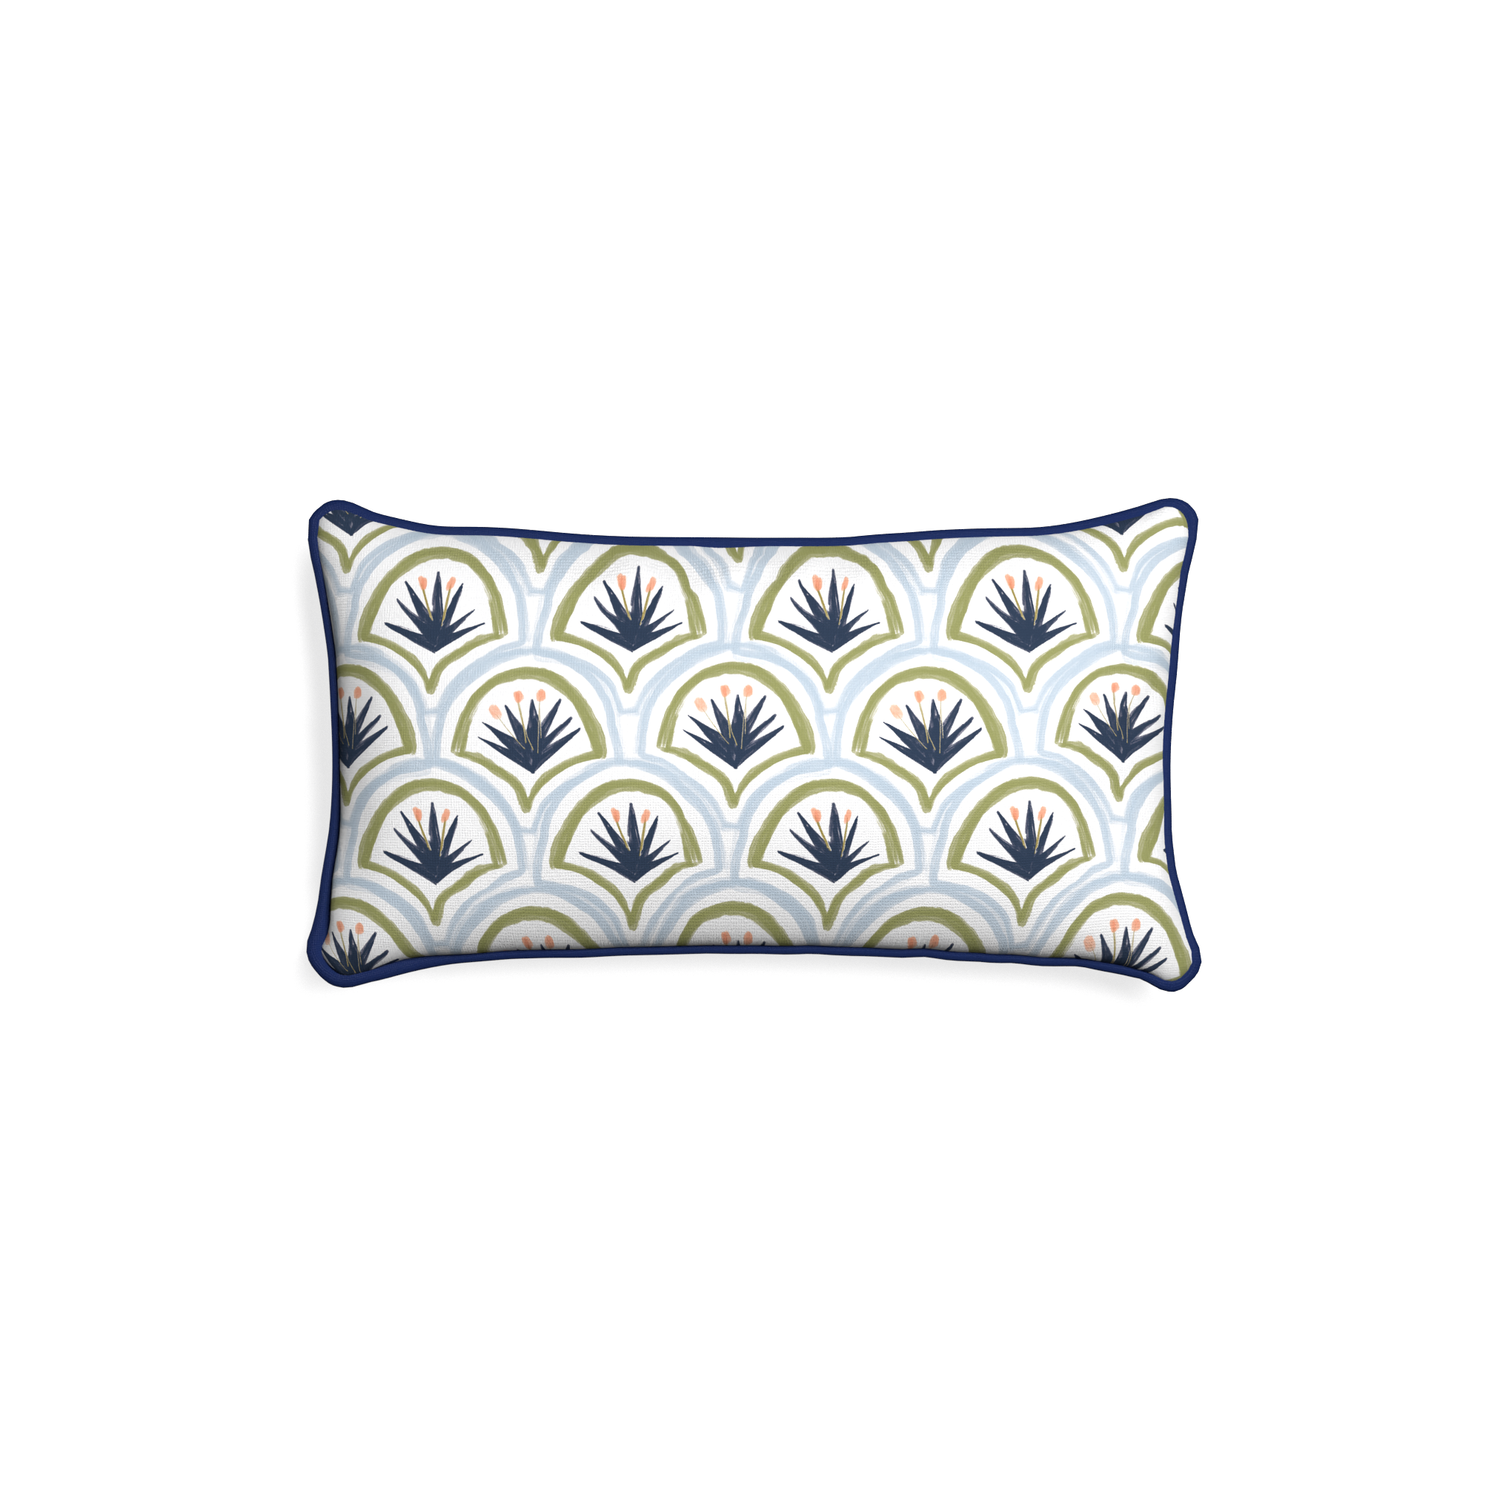 Petite-lumbar thatcher midnight custom art deco palm patternpillow with midnight piping on white background